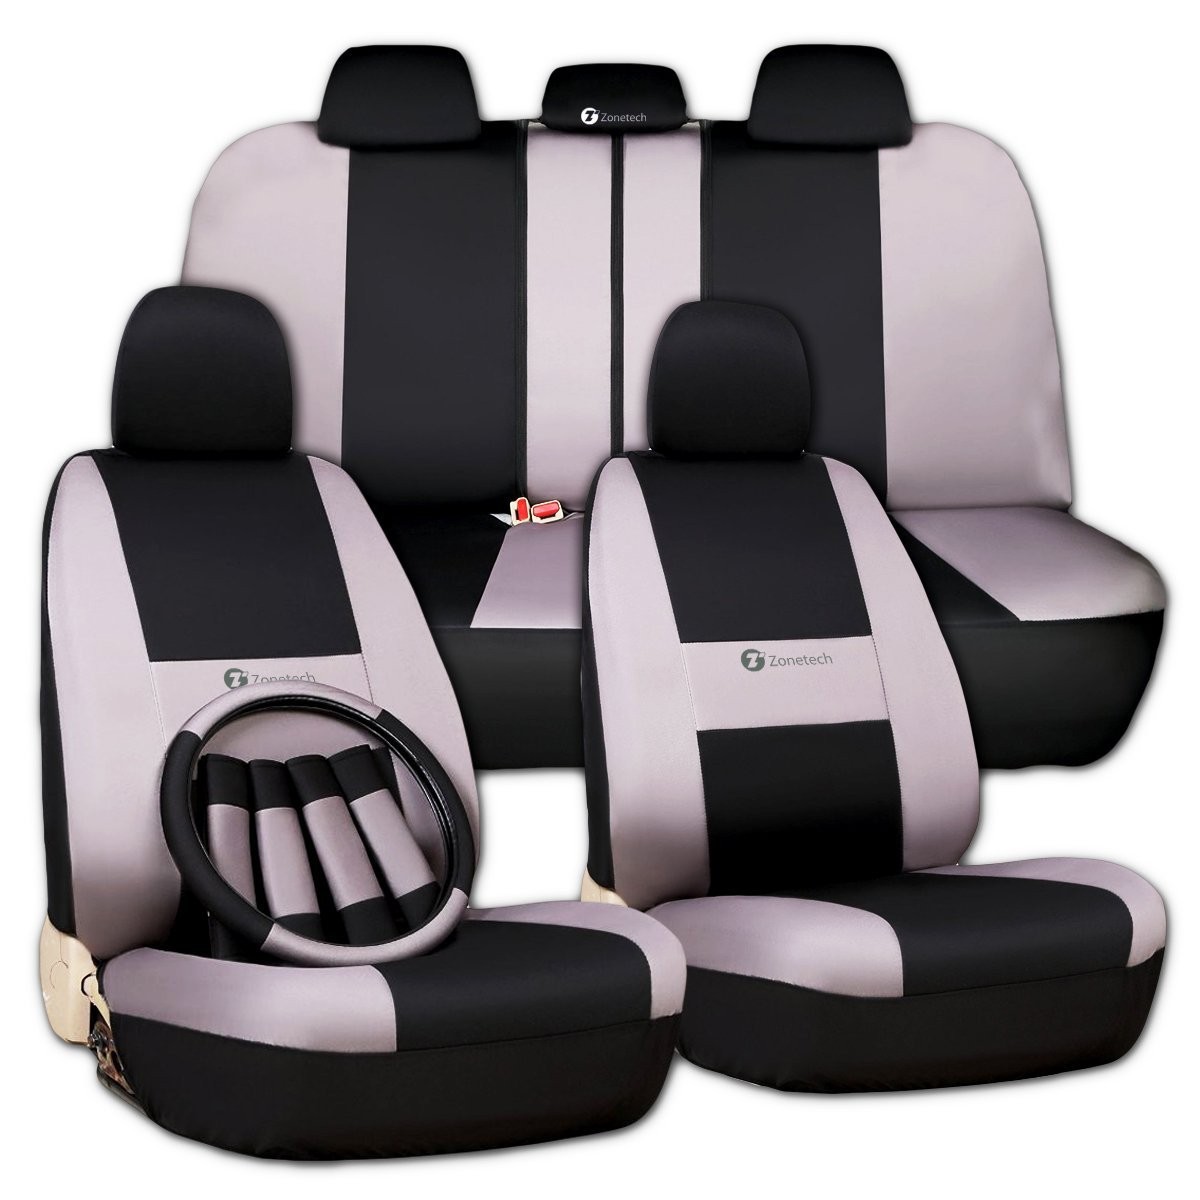 Black and Gray Full Seat Cover+ Steering Wheel Cover+ Seat Belt Cover